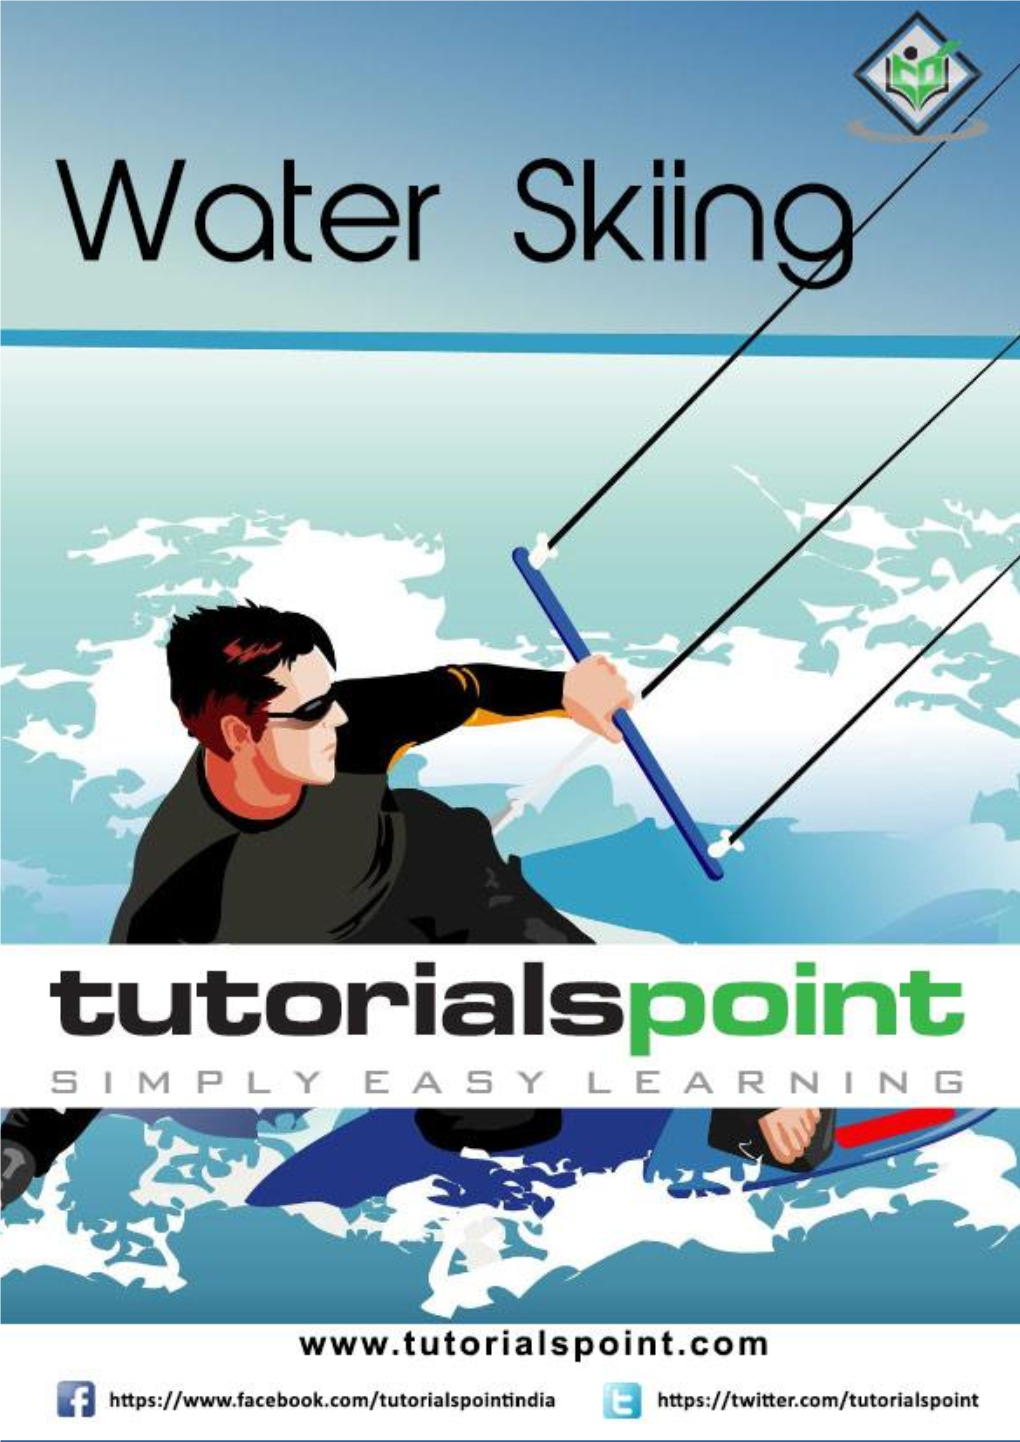 Water Skiing Is Acknowledged As a Sport of Challenge, Competition, and Adventure, As Well As a Recreational Activity